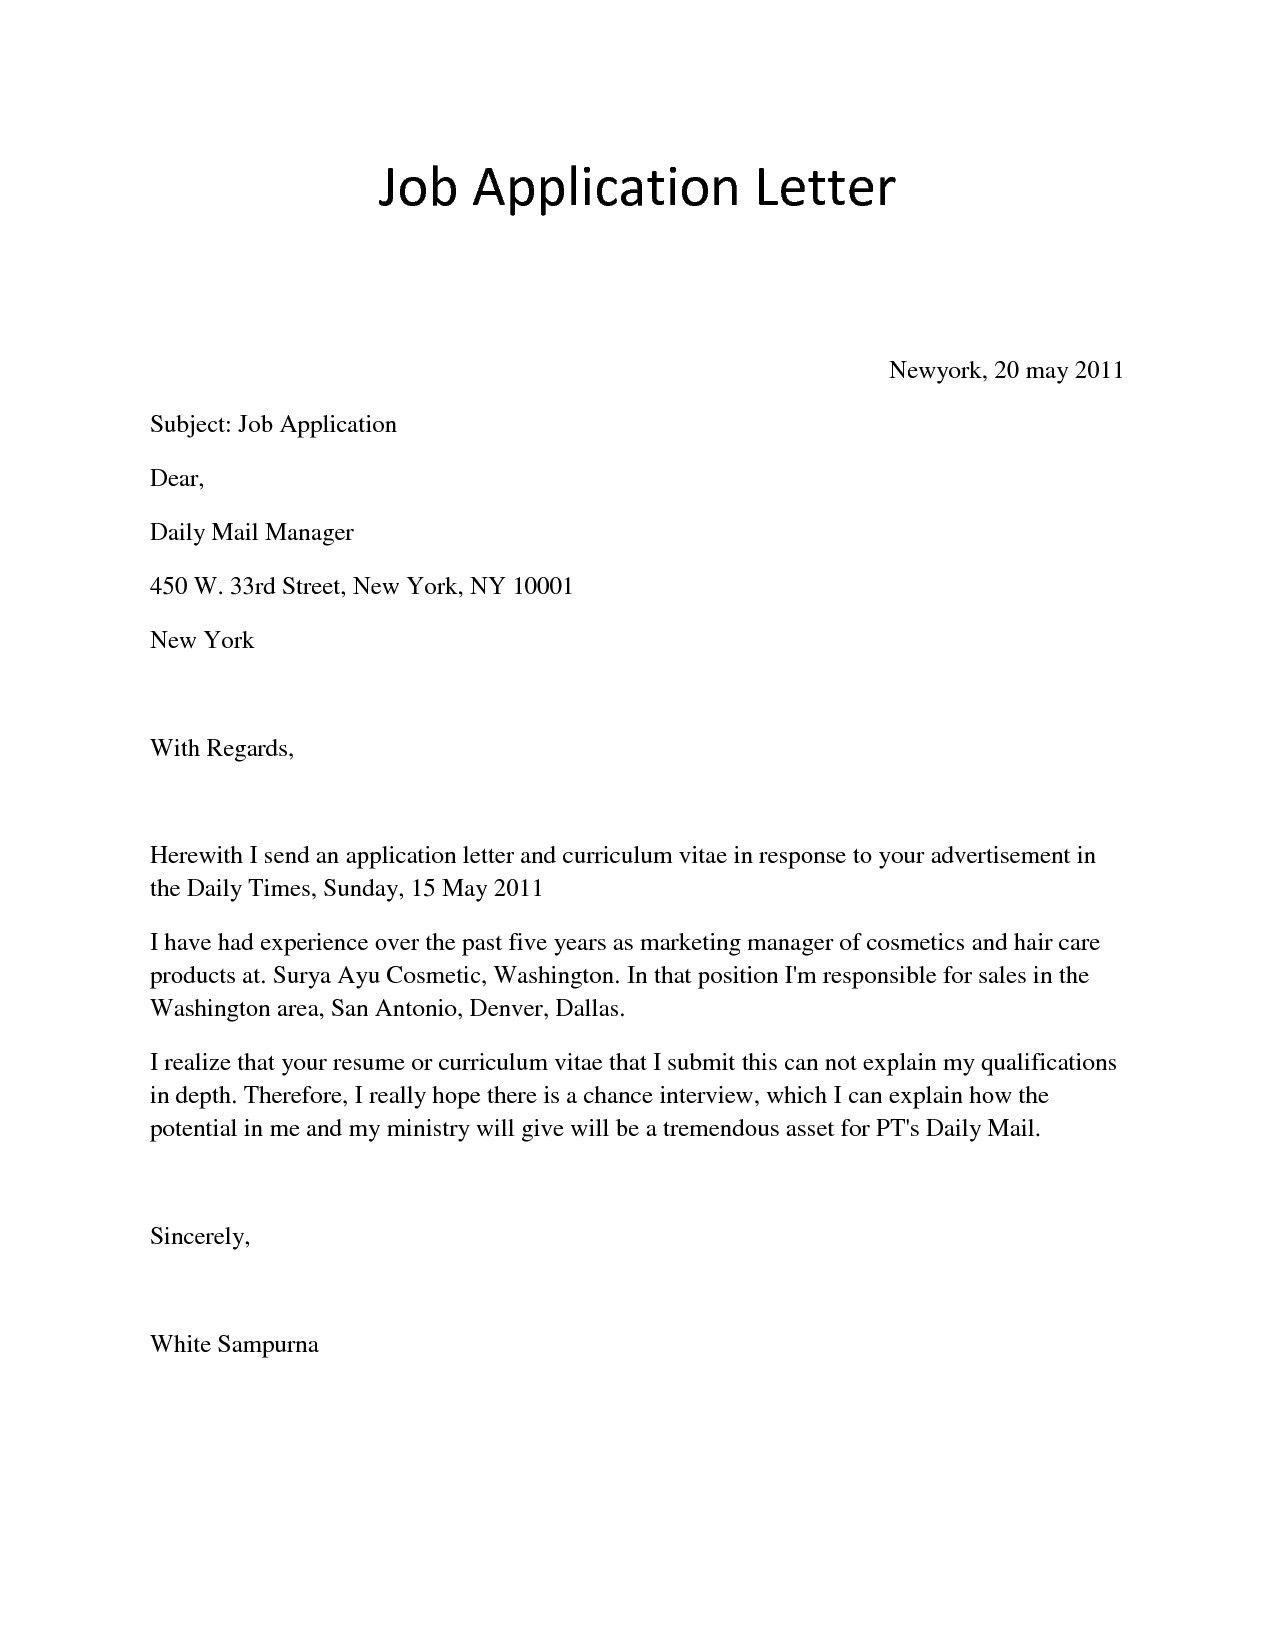 Applying For A Job Letter Example